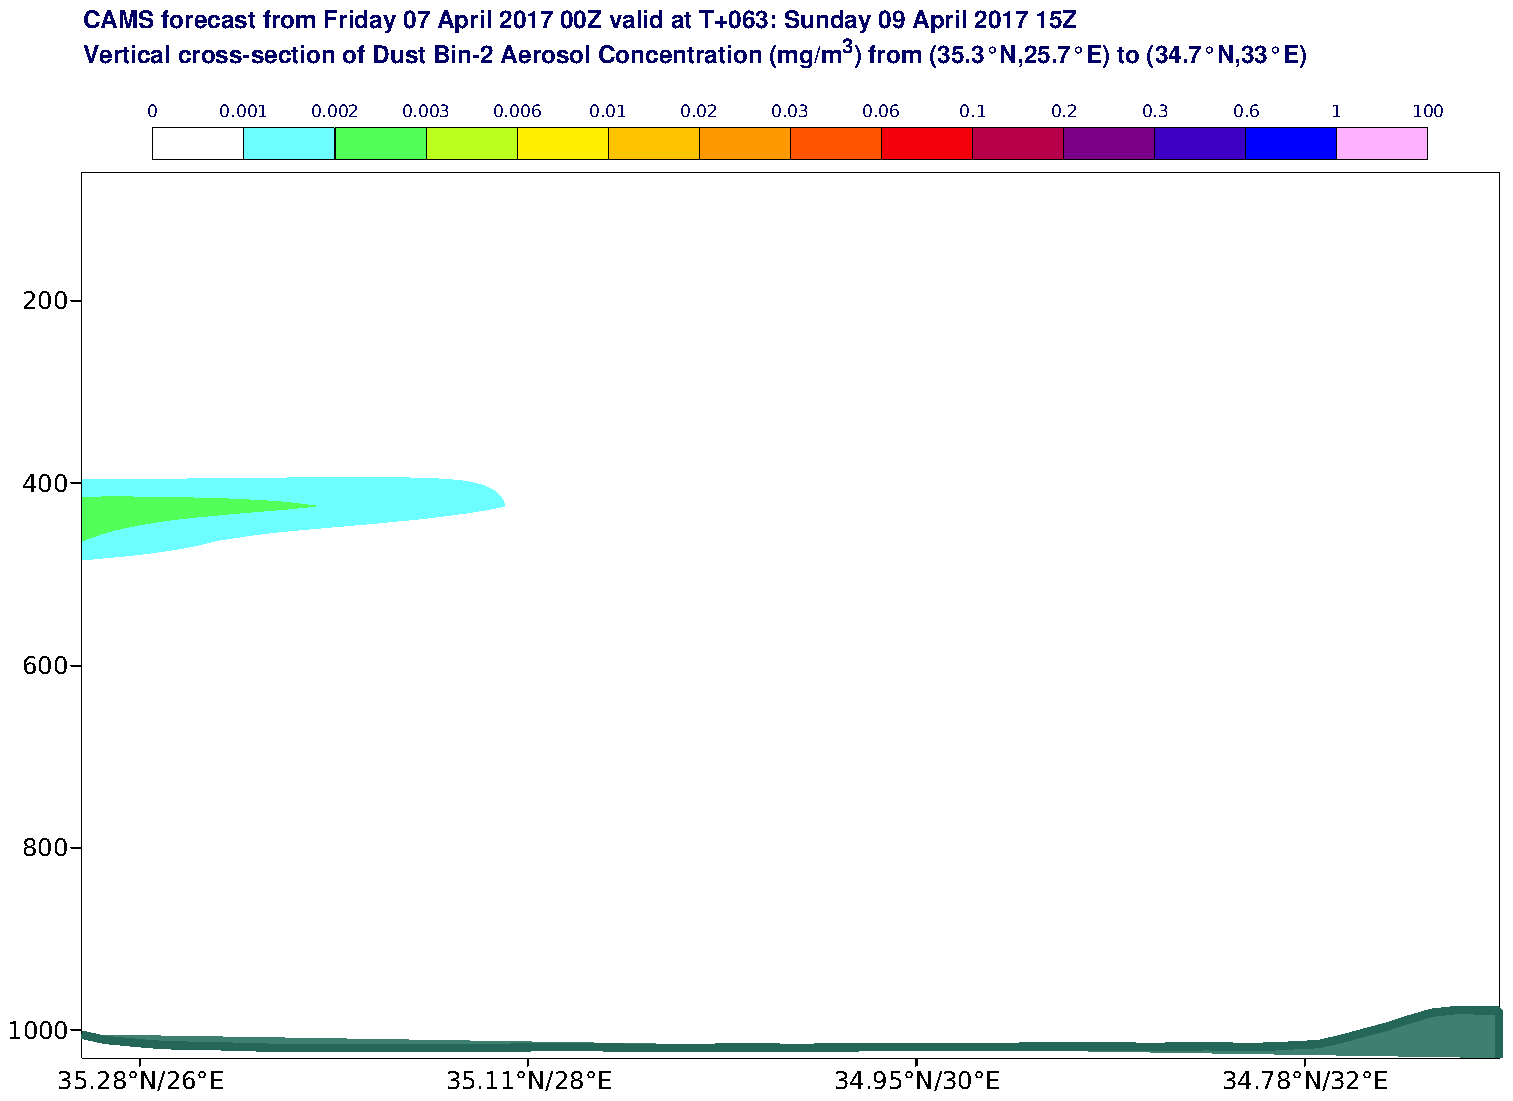 Vertical cross-section of Dust Bin-2 Aerosol Concentration (mg/m3) valid at T63 - 2017-04-09 15:00